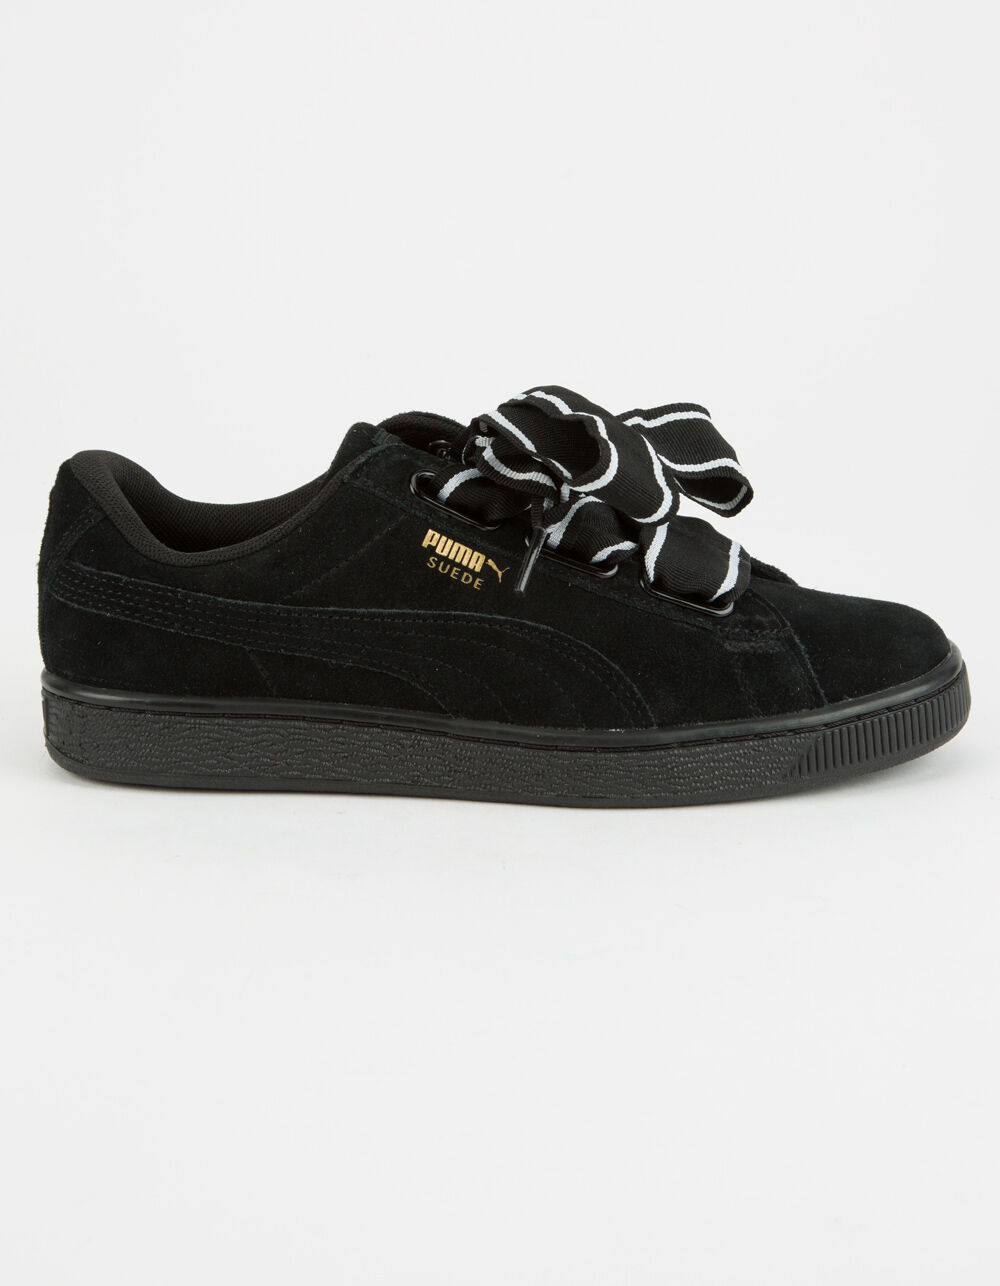 PUMA Suede Heart Satin Womens Shoes image number 0